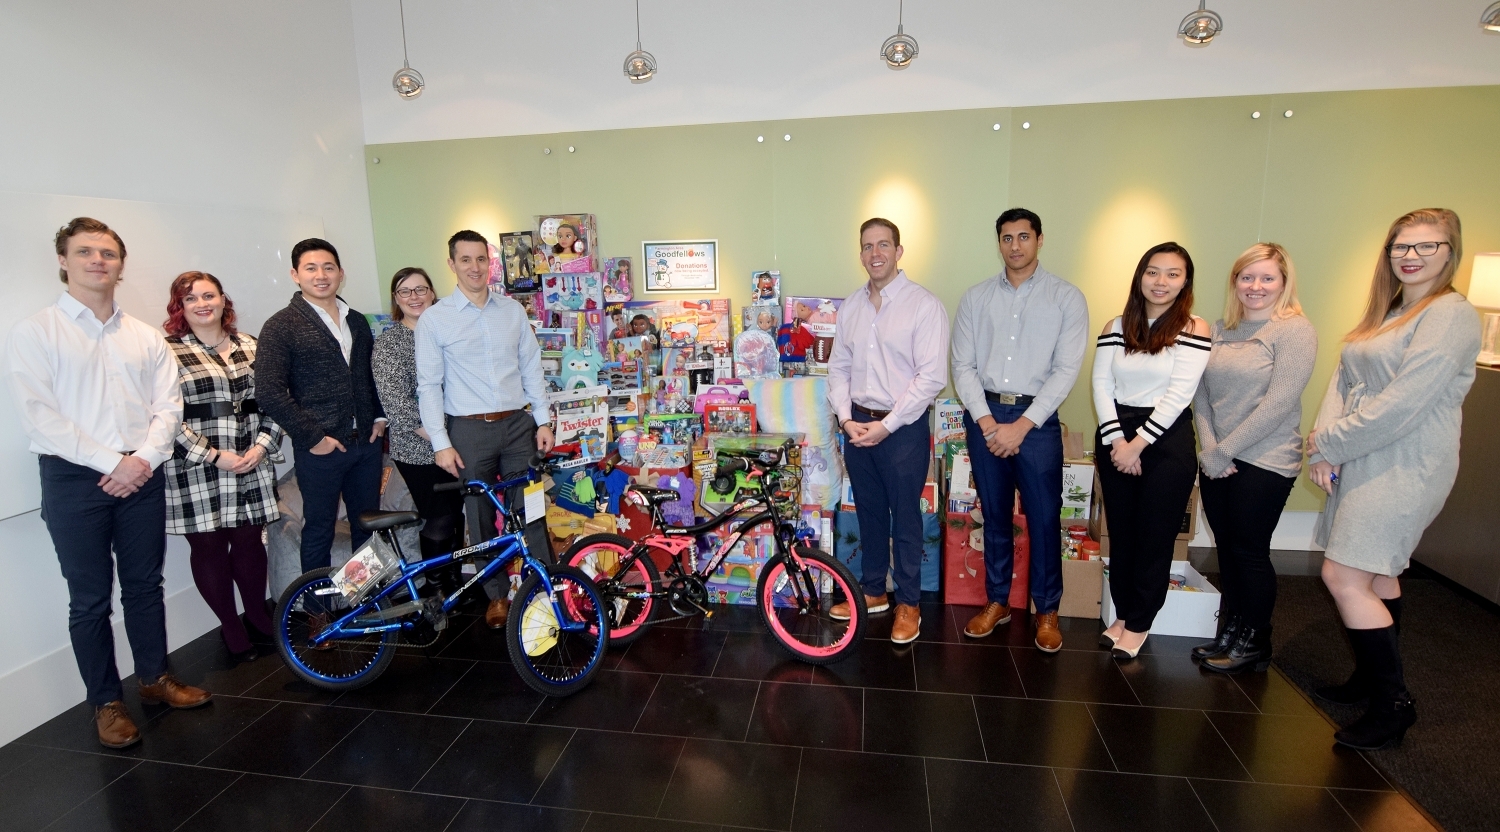 RHP Properties Raises More than $4,500 in Toys and Food Donations for Goodfellows